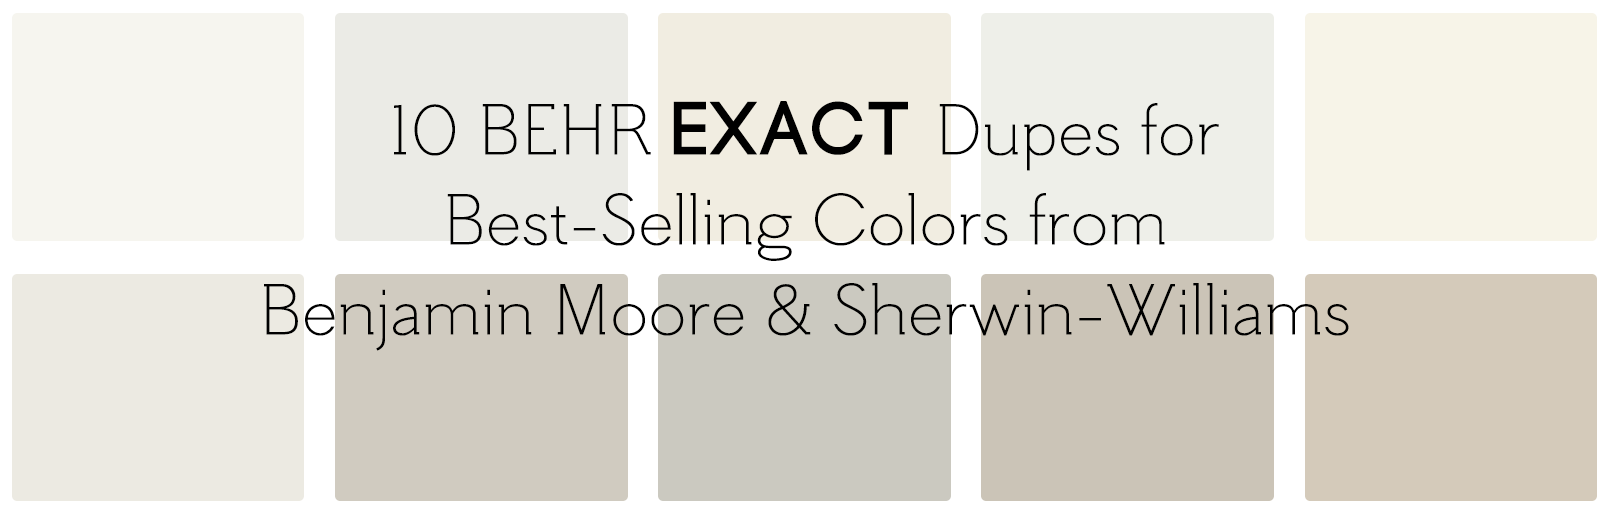 EXACT Dupes for these best-selling colors from Benjamin Moore and Sherwin-Williams